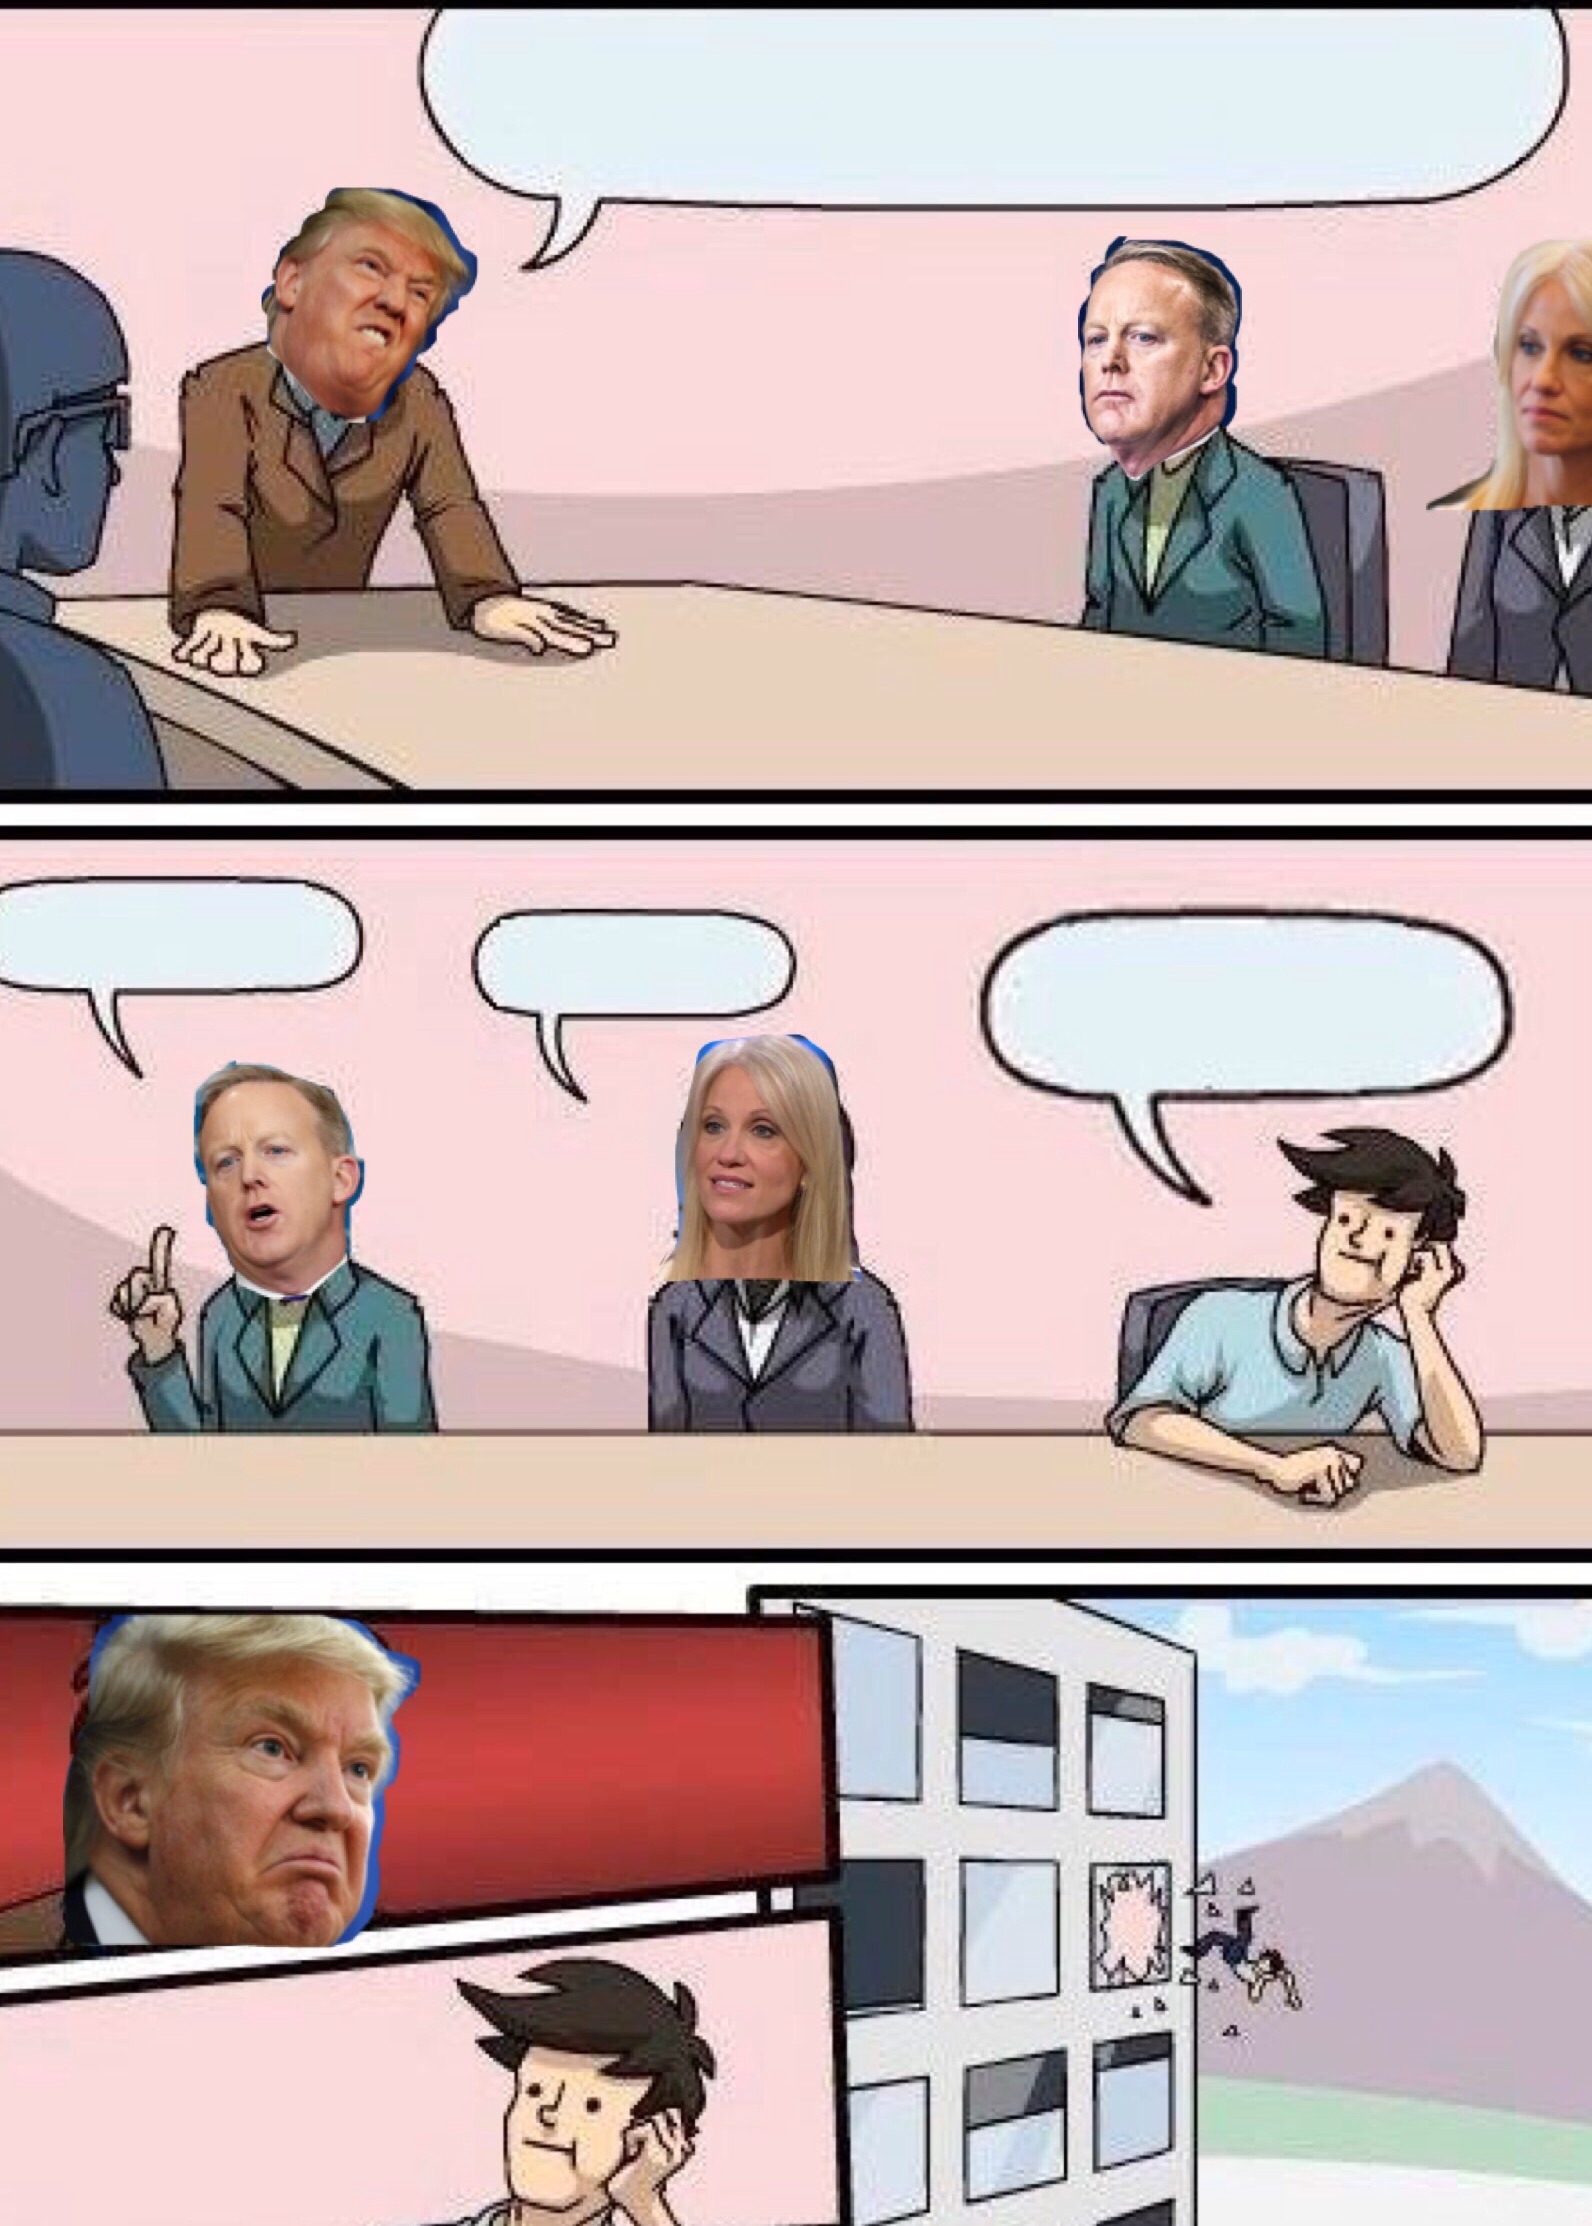 High Quality Boardroom Meeting Suggestion: Trump Version With Sean Spicer And Blank Meme Template